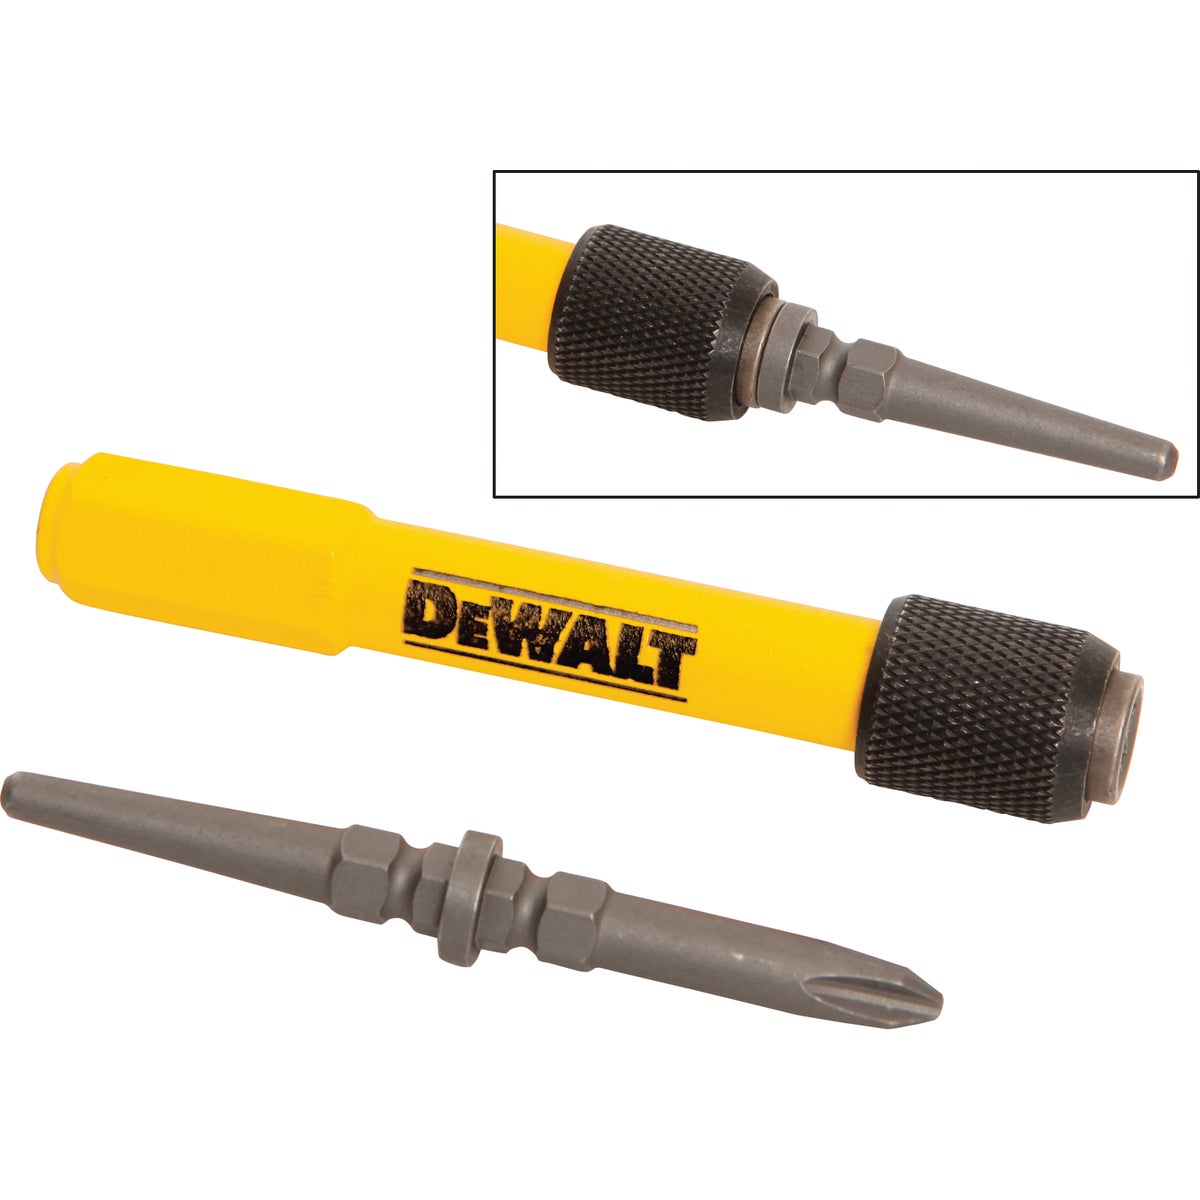 Item 300393, Interchangeable tip for convenience (includes 1/32", 2/32", 3/32", and #2 